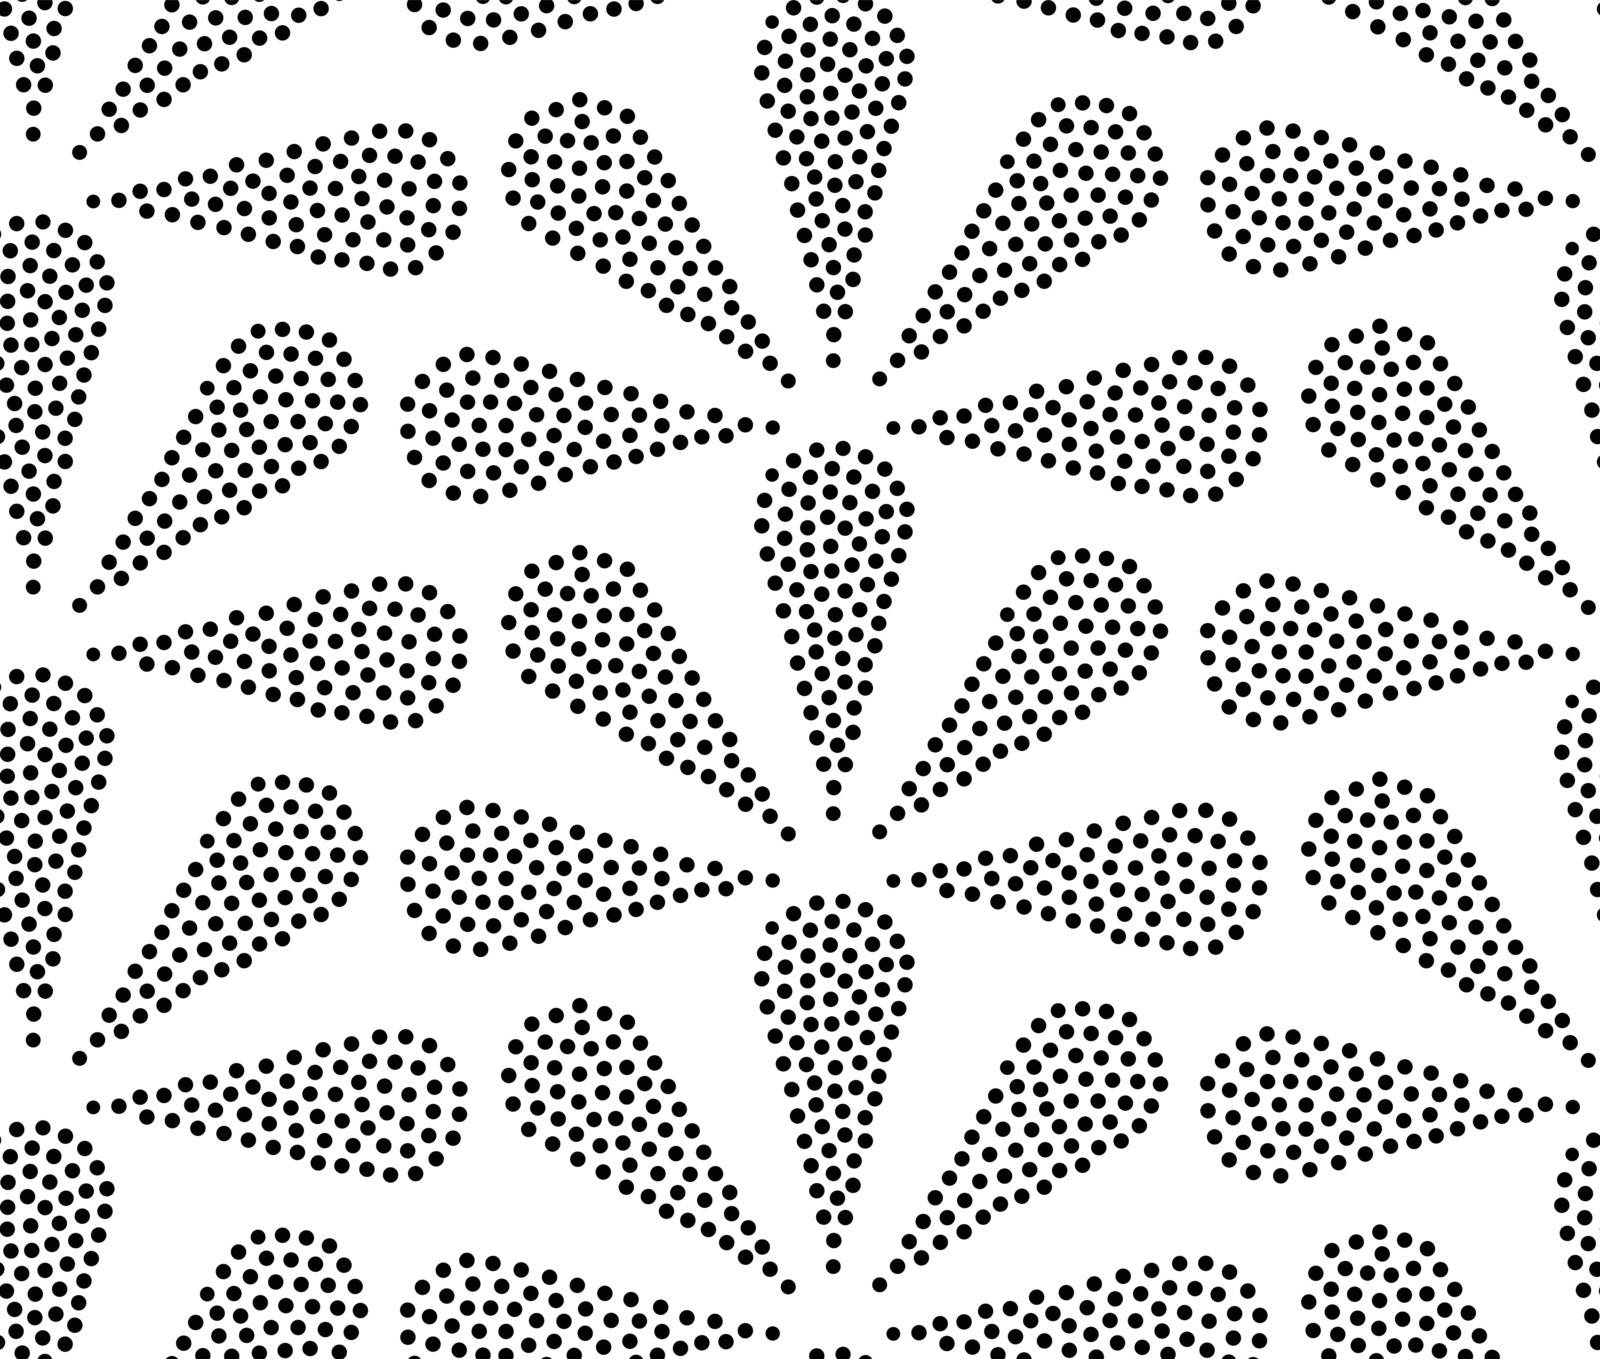 Classic abstract Seamless geometric pattern. Vector illustration. Design in classical simple pointillism style